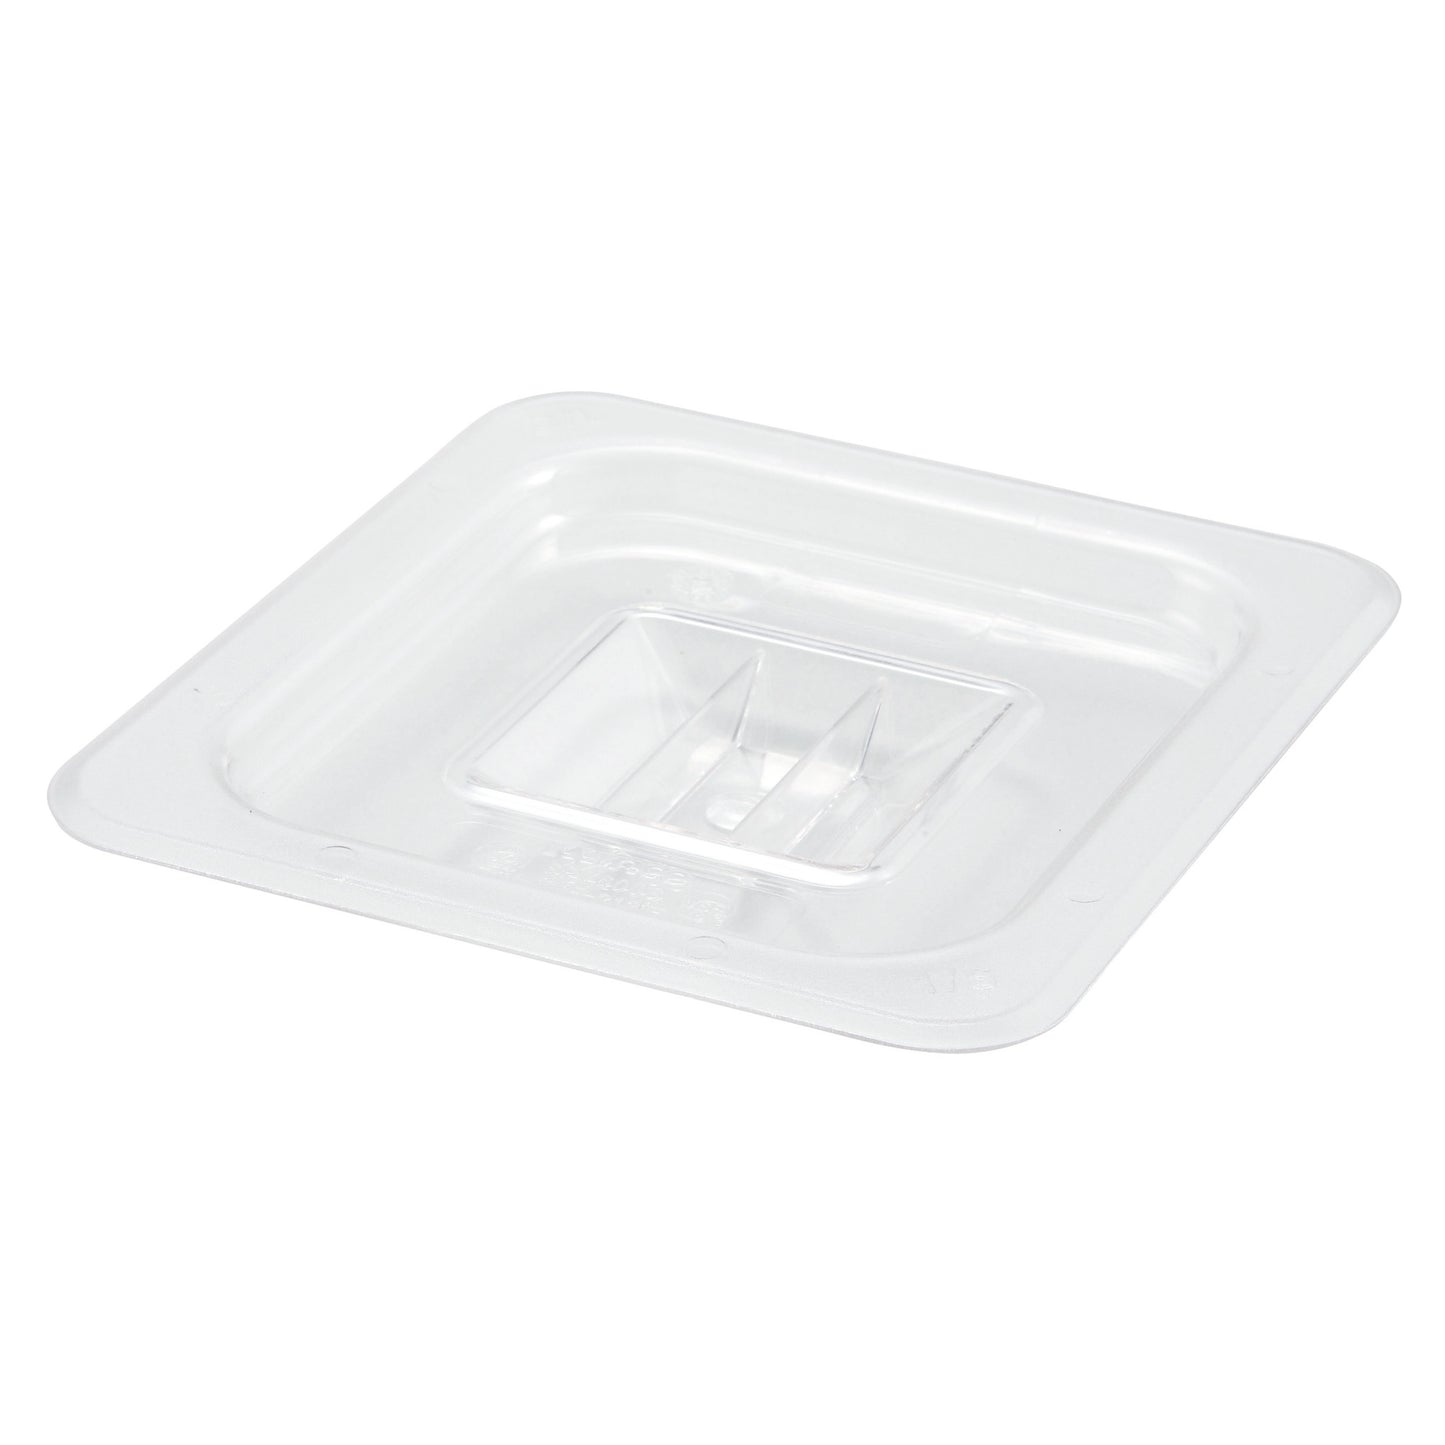 SP7600S - Polycarbonate Food Pan Cover, Solid - Sixth (1/6)